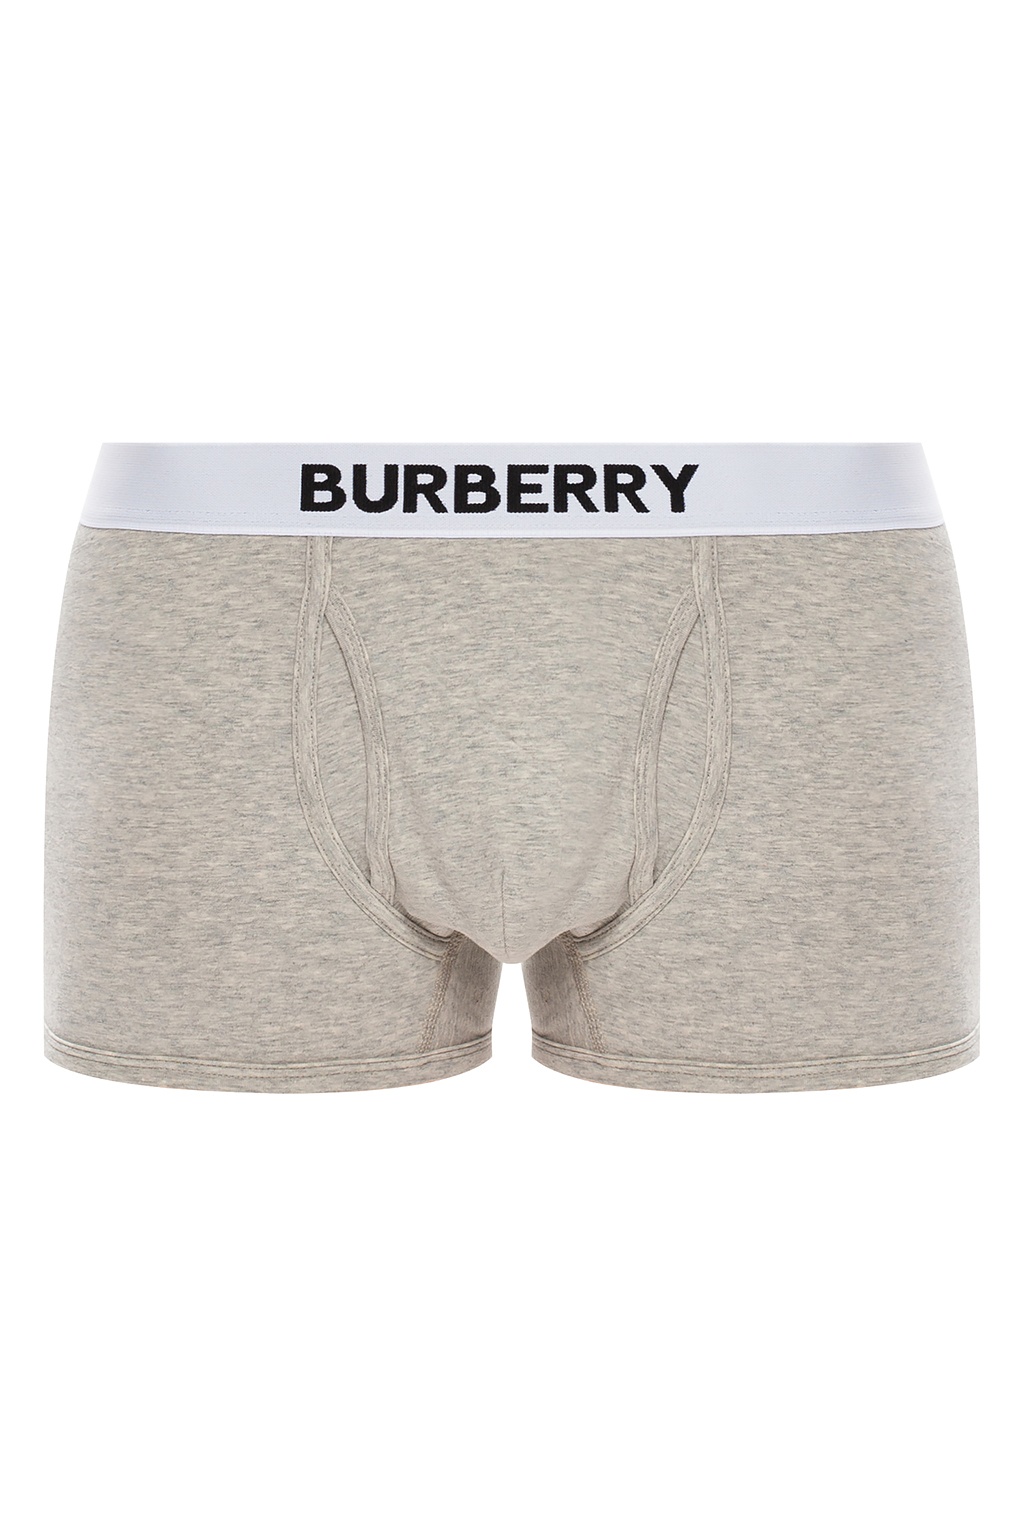 Shop Burberry Boxer Briefs by FORYOUSEOUL